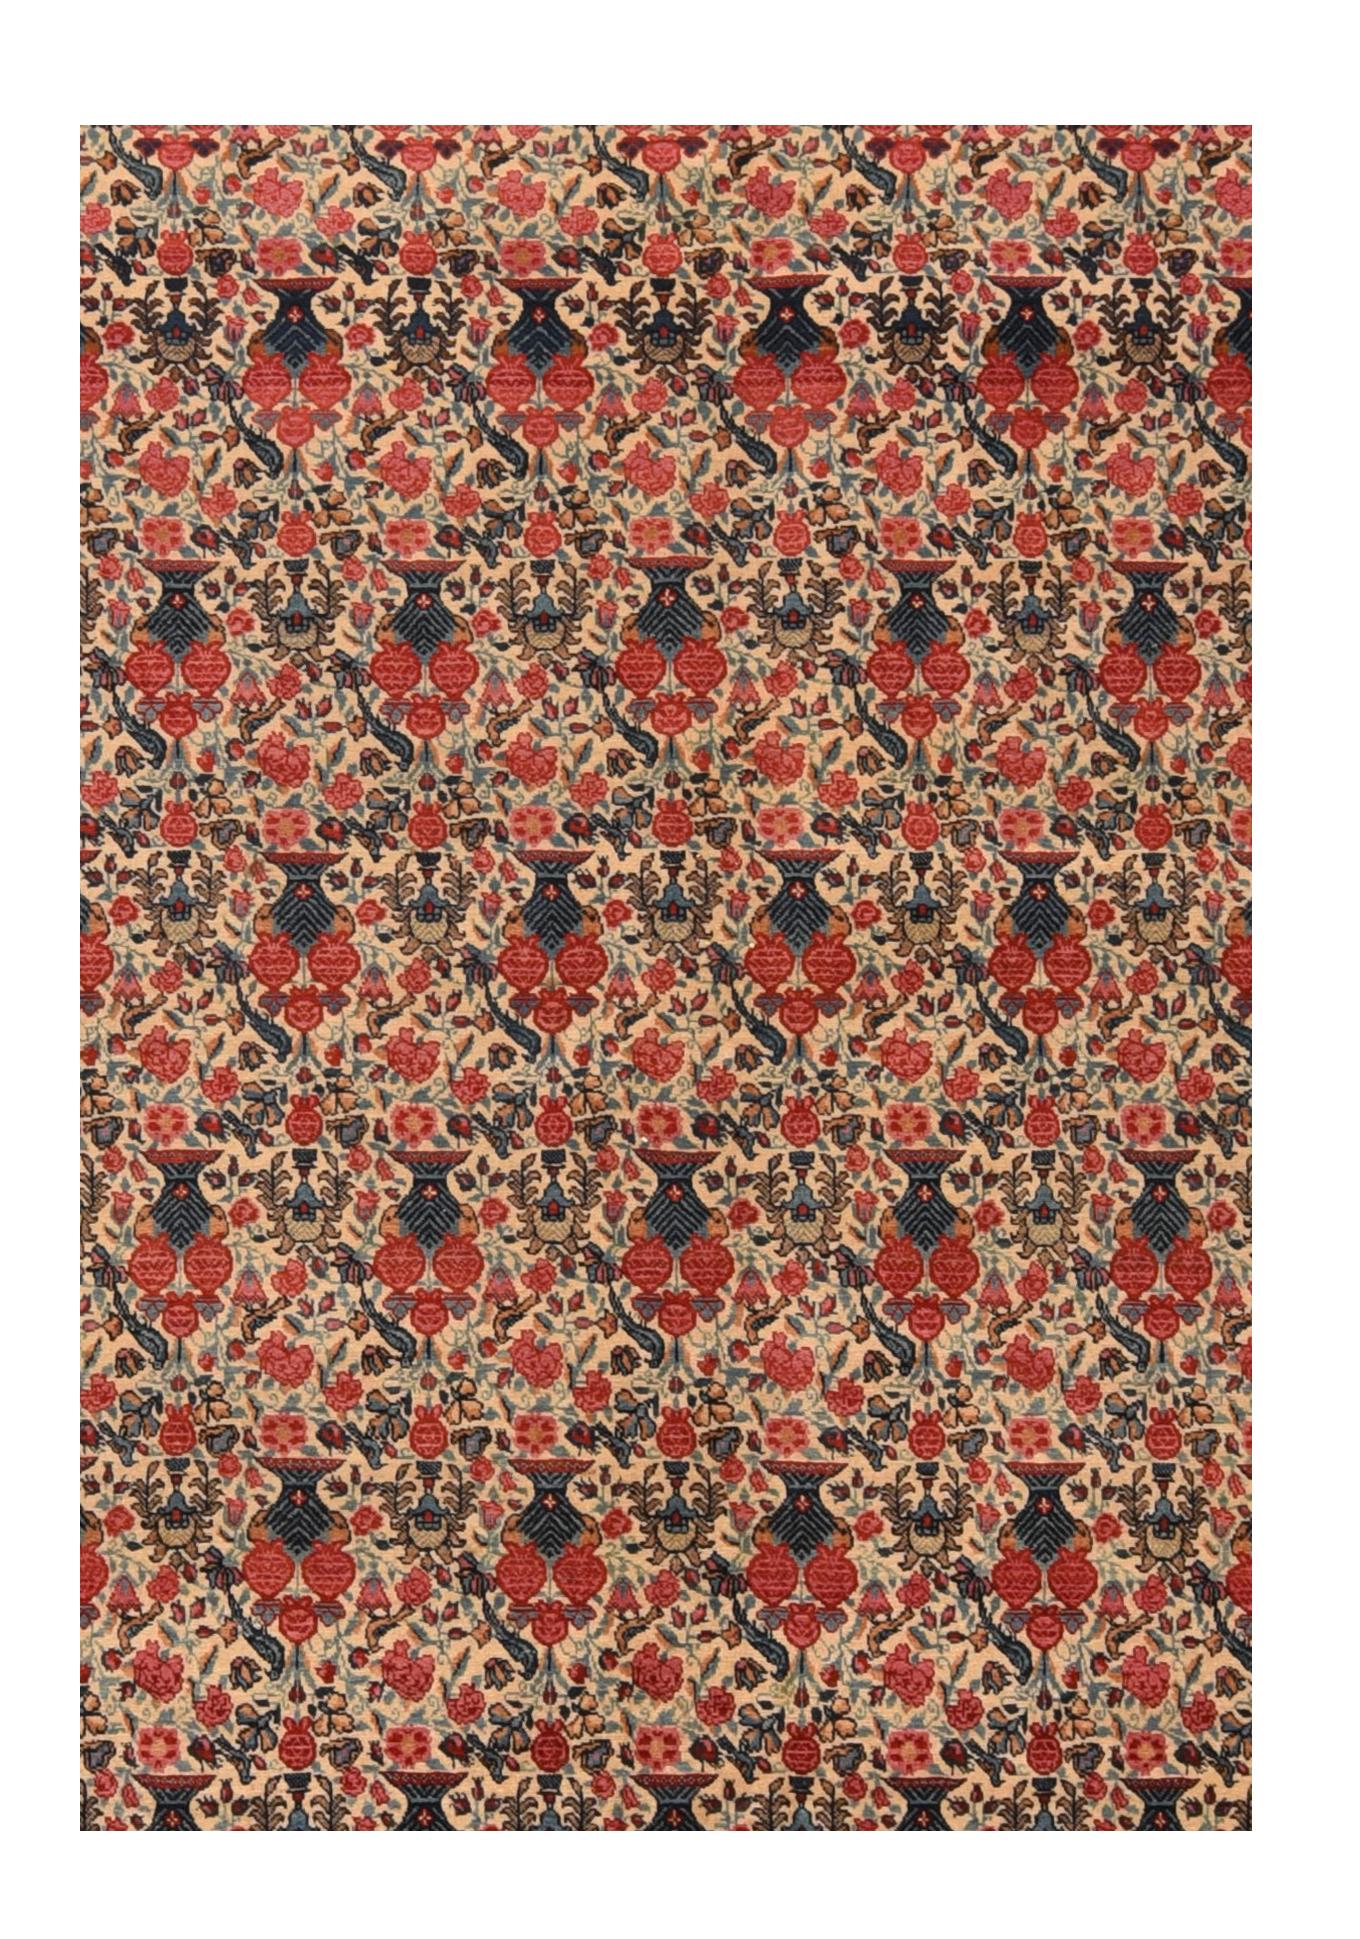 The allover Zil-i-Sultan (“shadow of the sultan” design was particularly popular in Persia in the later 19th century. This interpretation features offset rows of navy vases with red roses, on a cream-straw ground, with a dense infill of palmettes